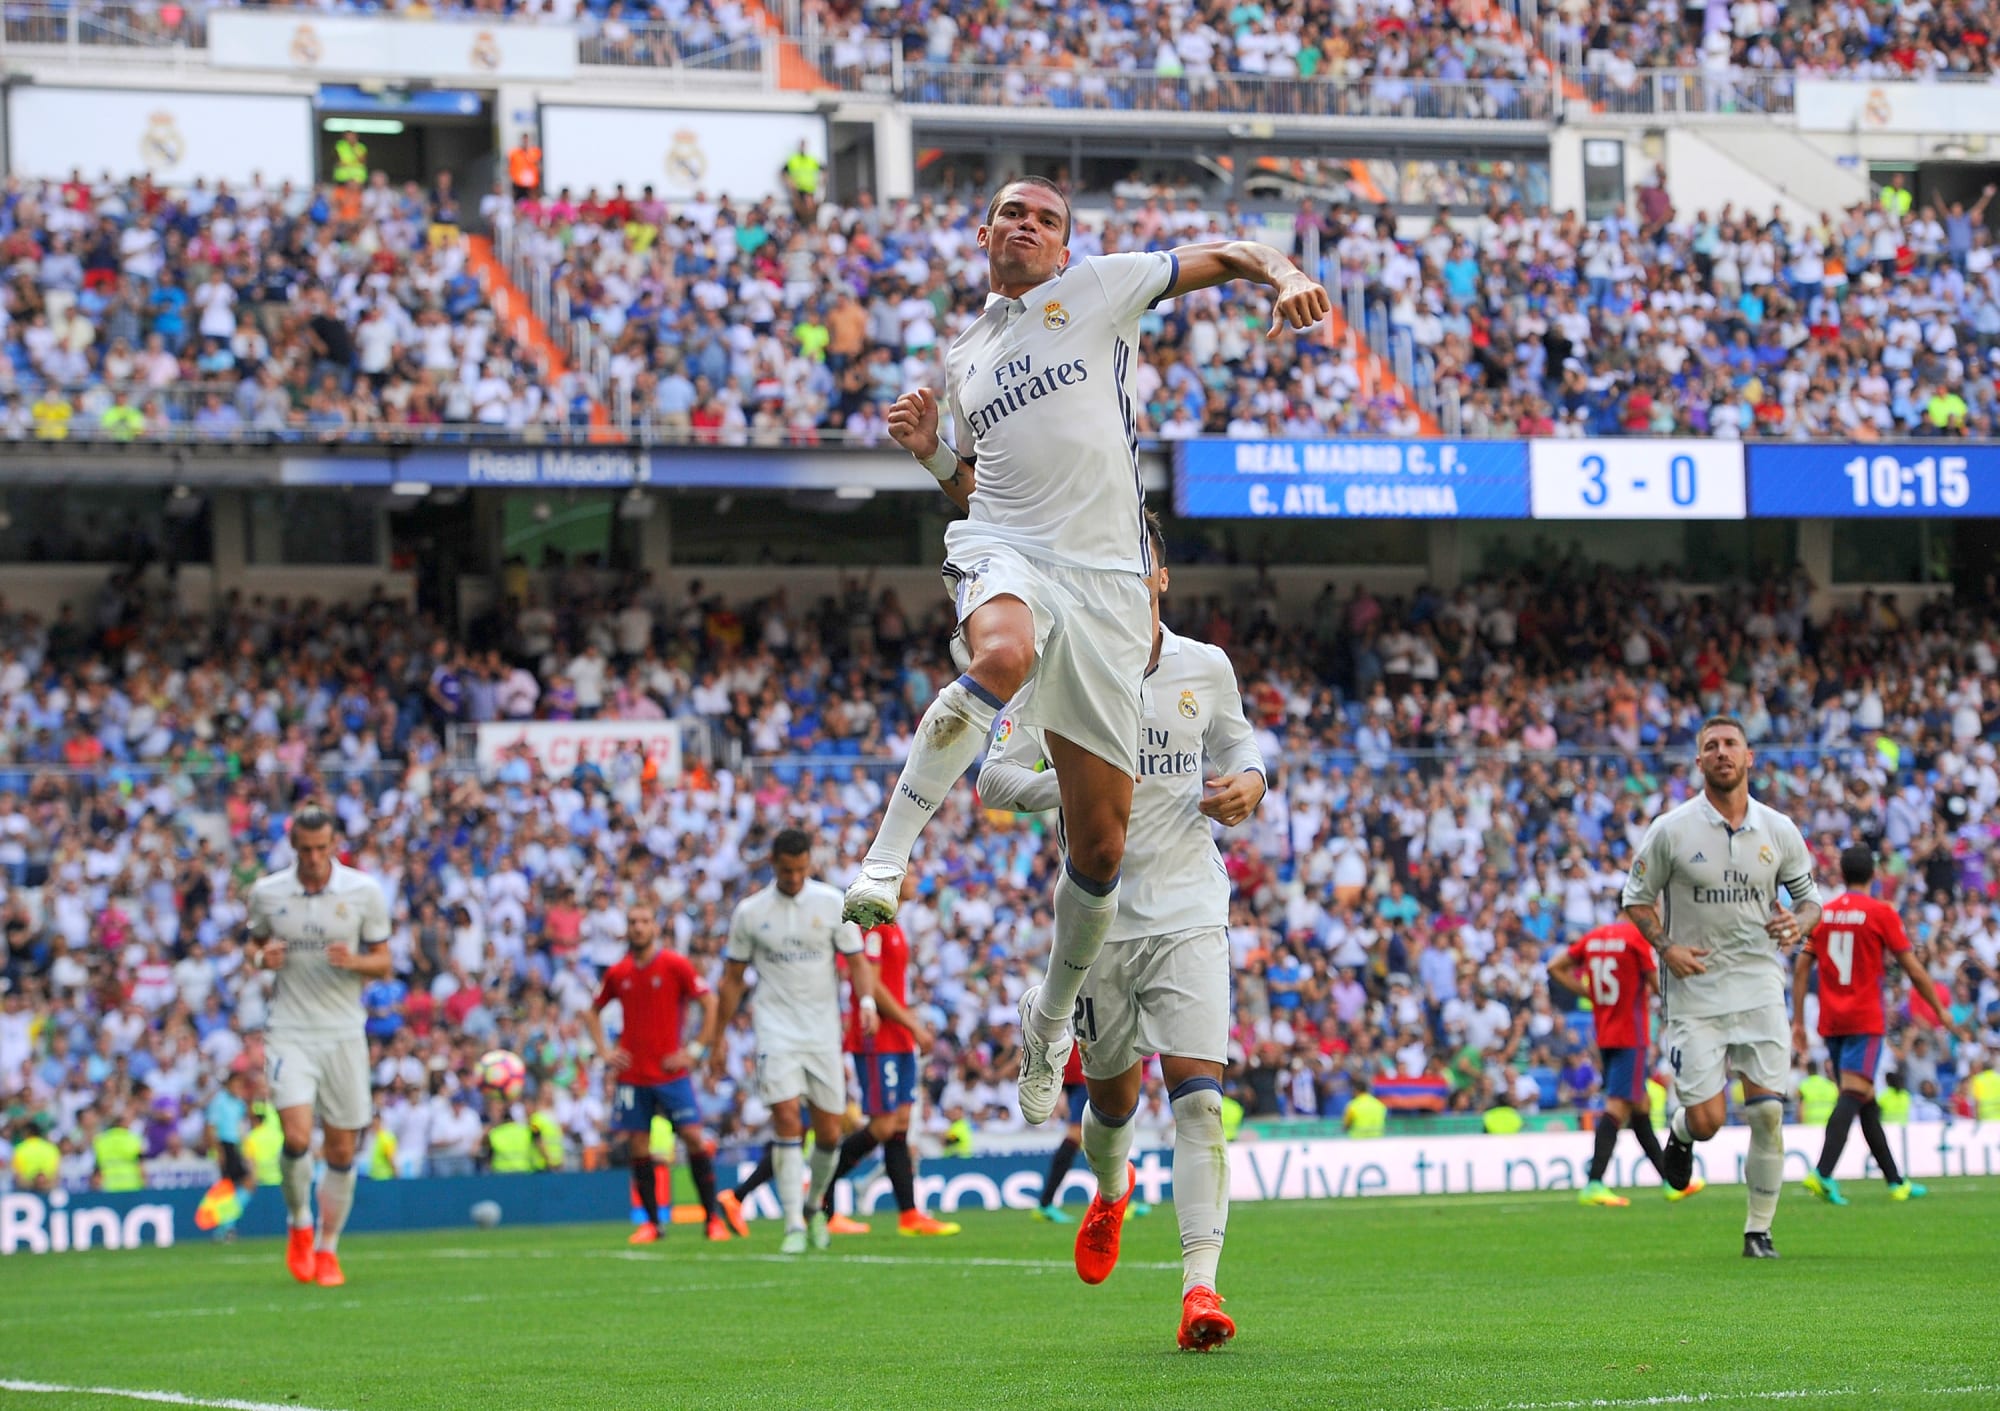 Match Day 3: Real Madrid Sit Atop the Table